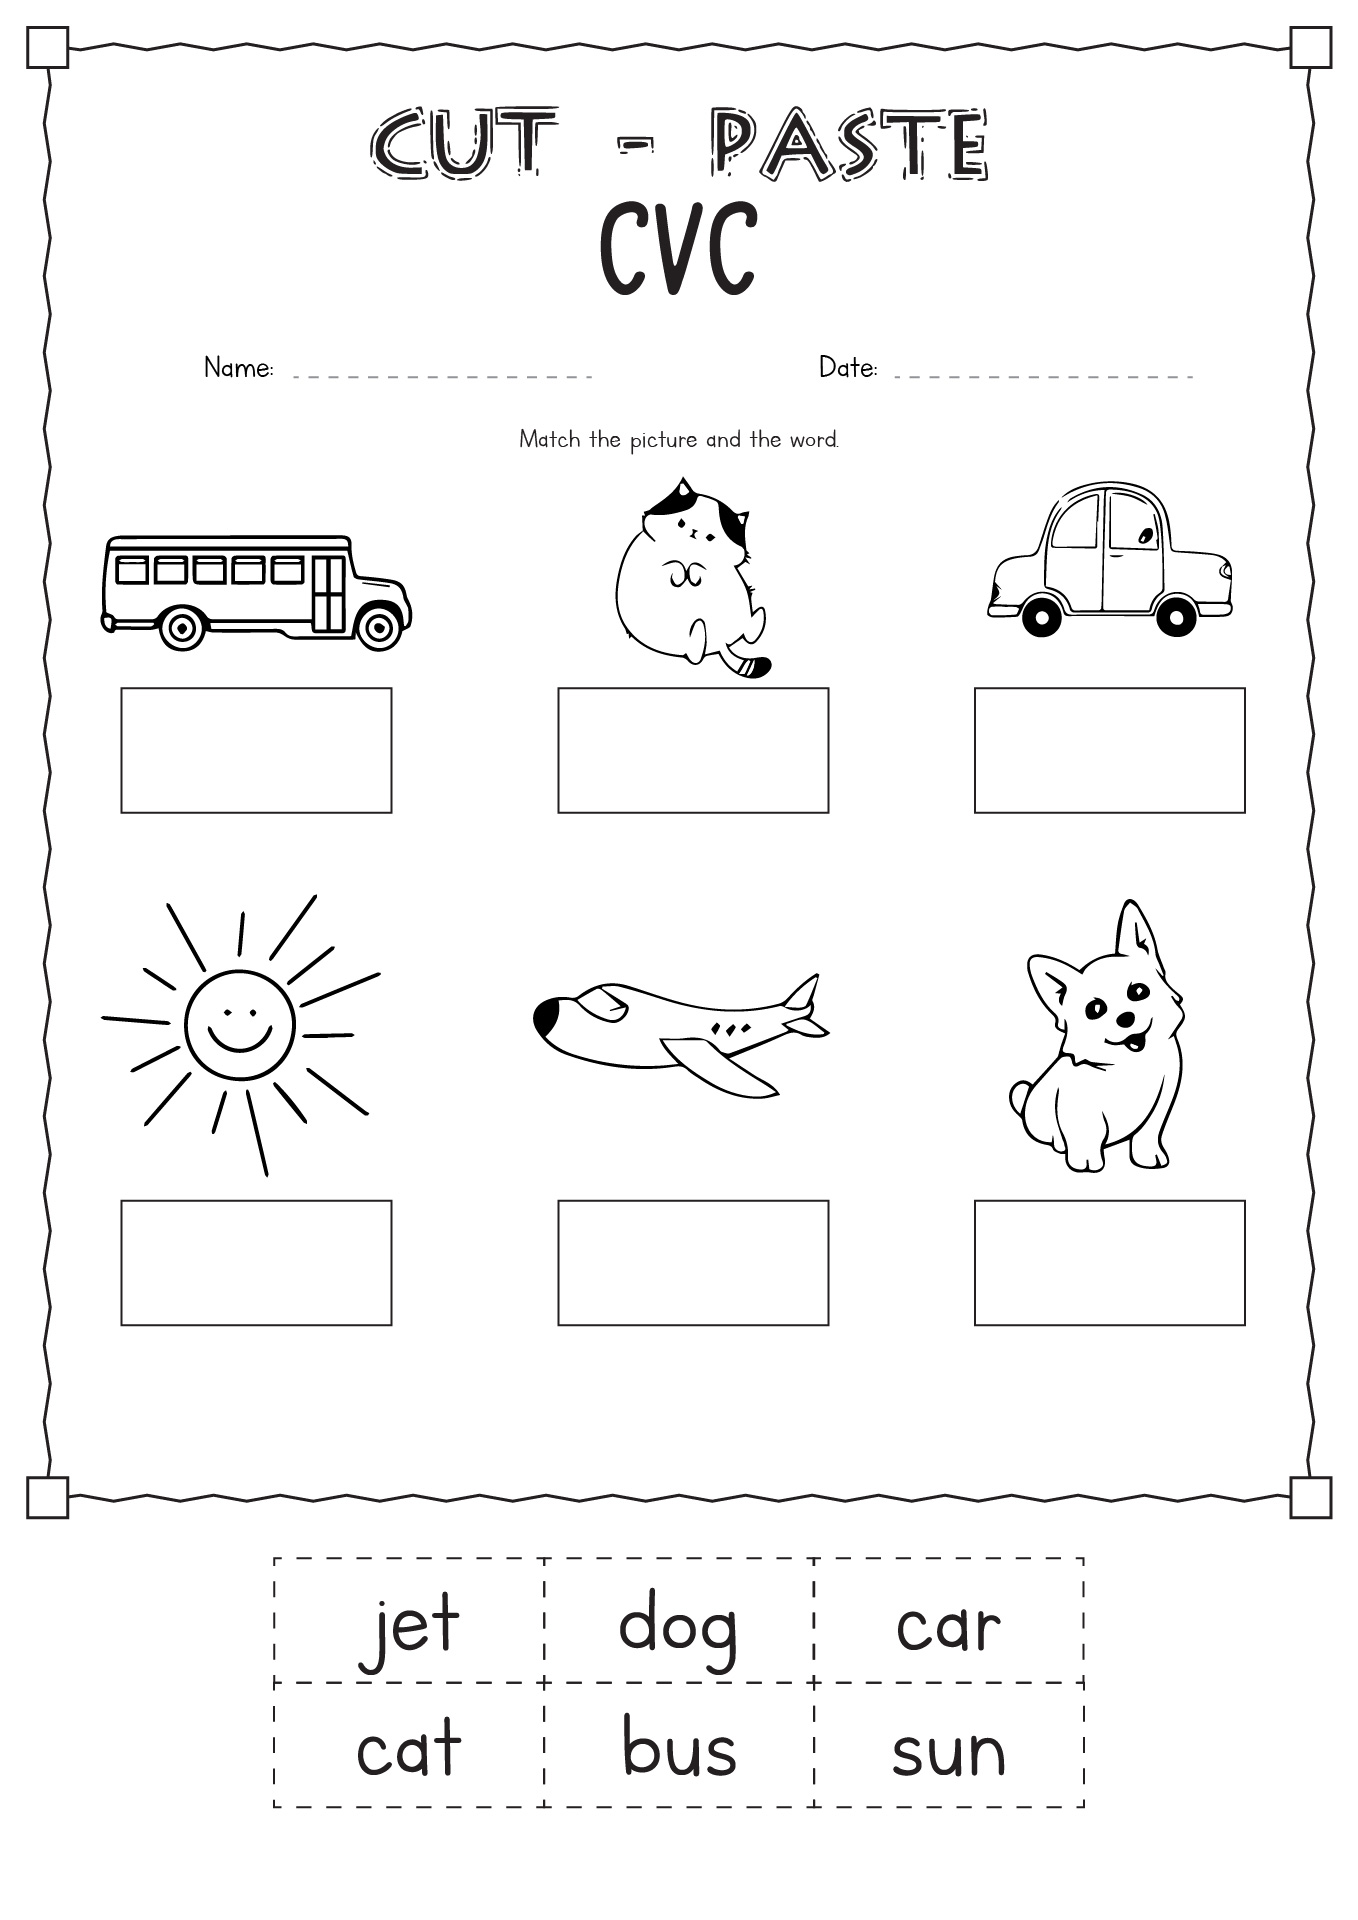 Cut and Paste CVC Worksheets